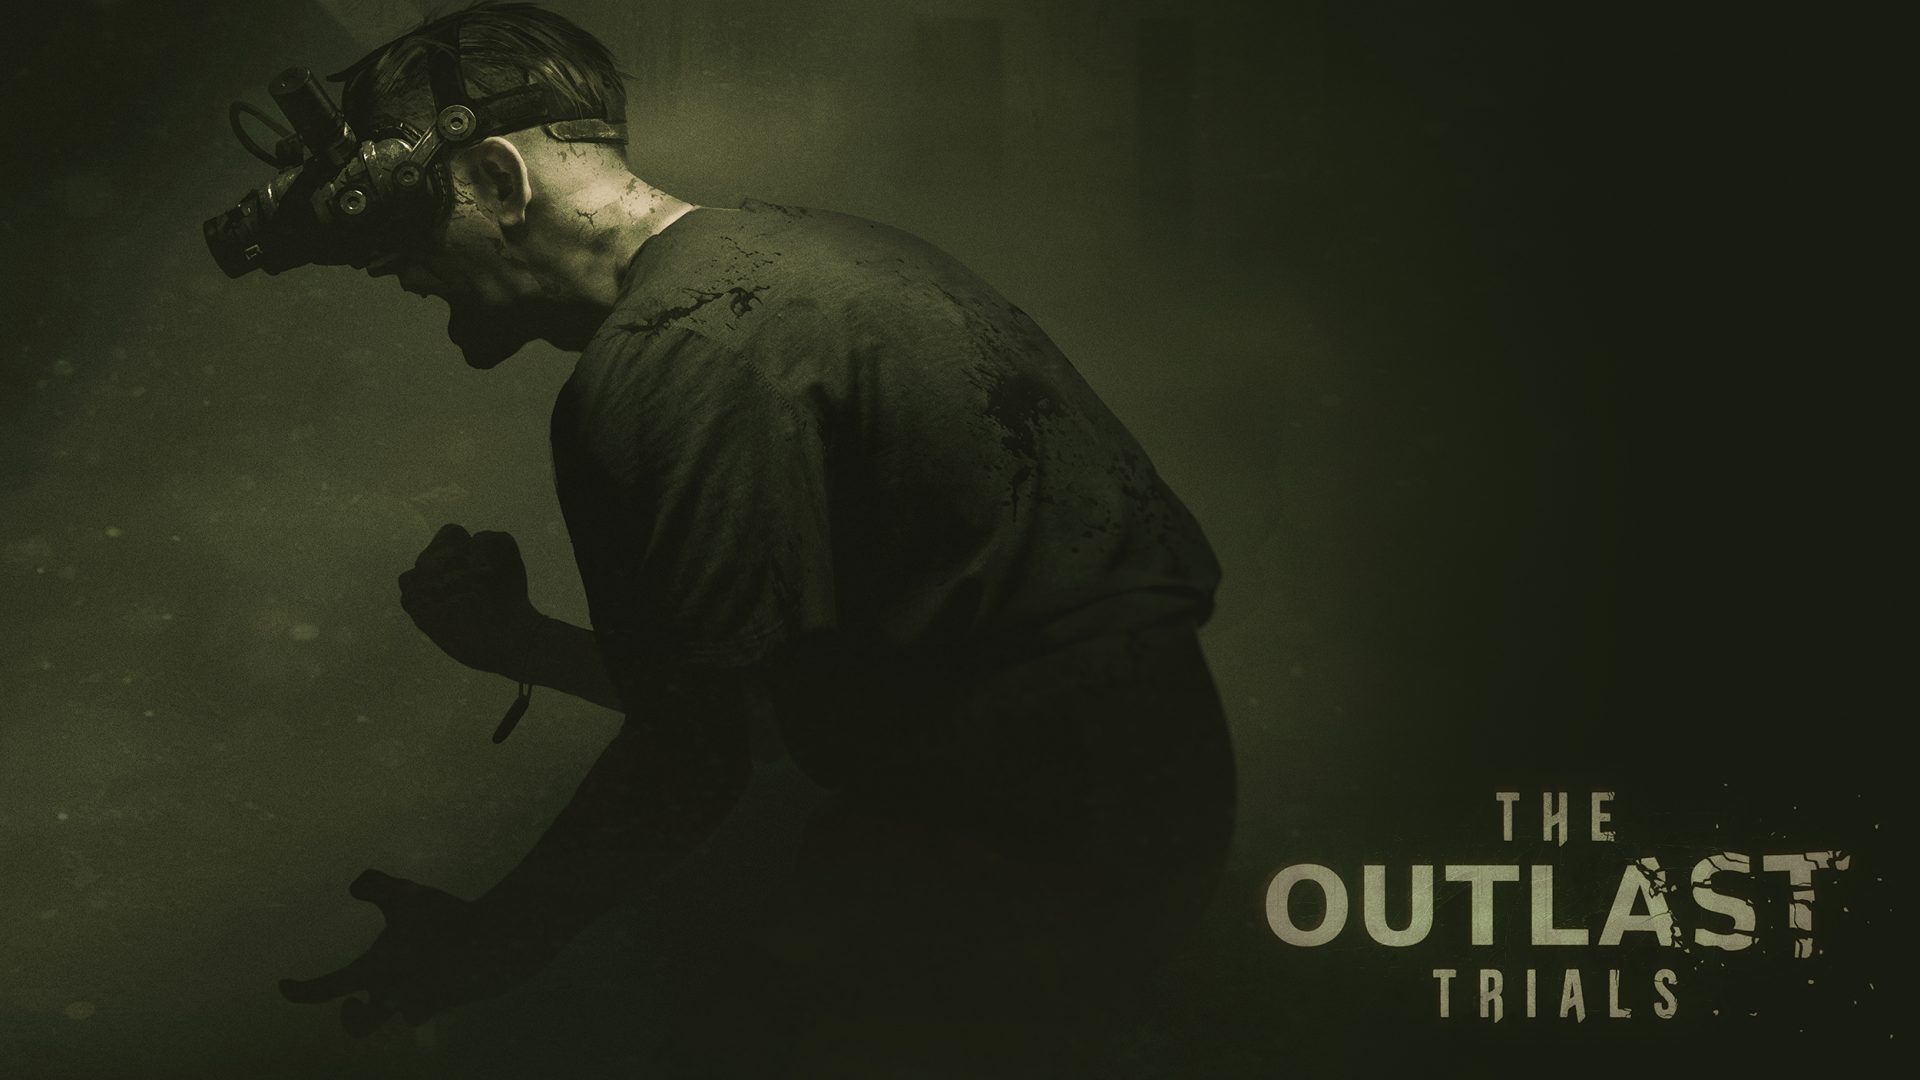 outlast trials: release